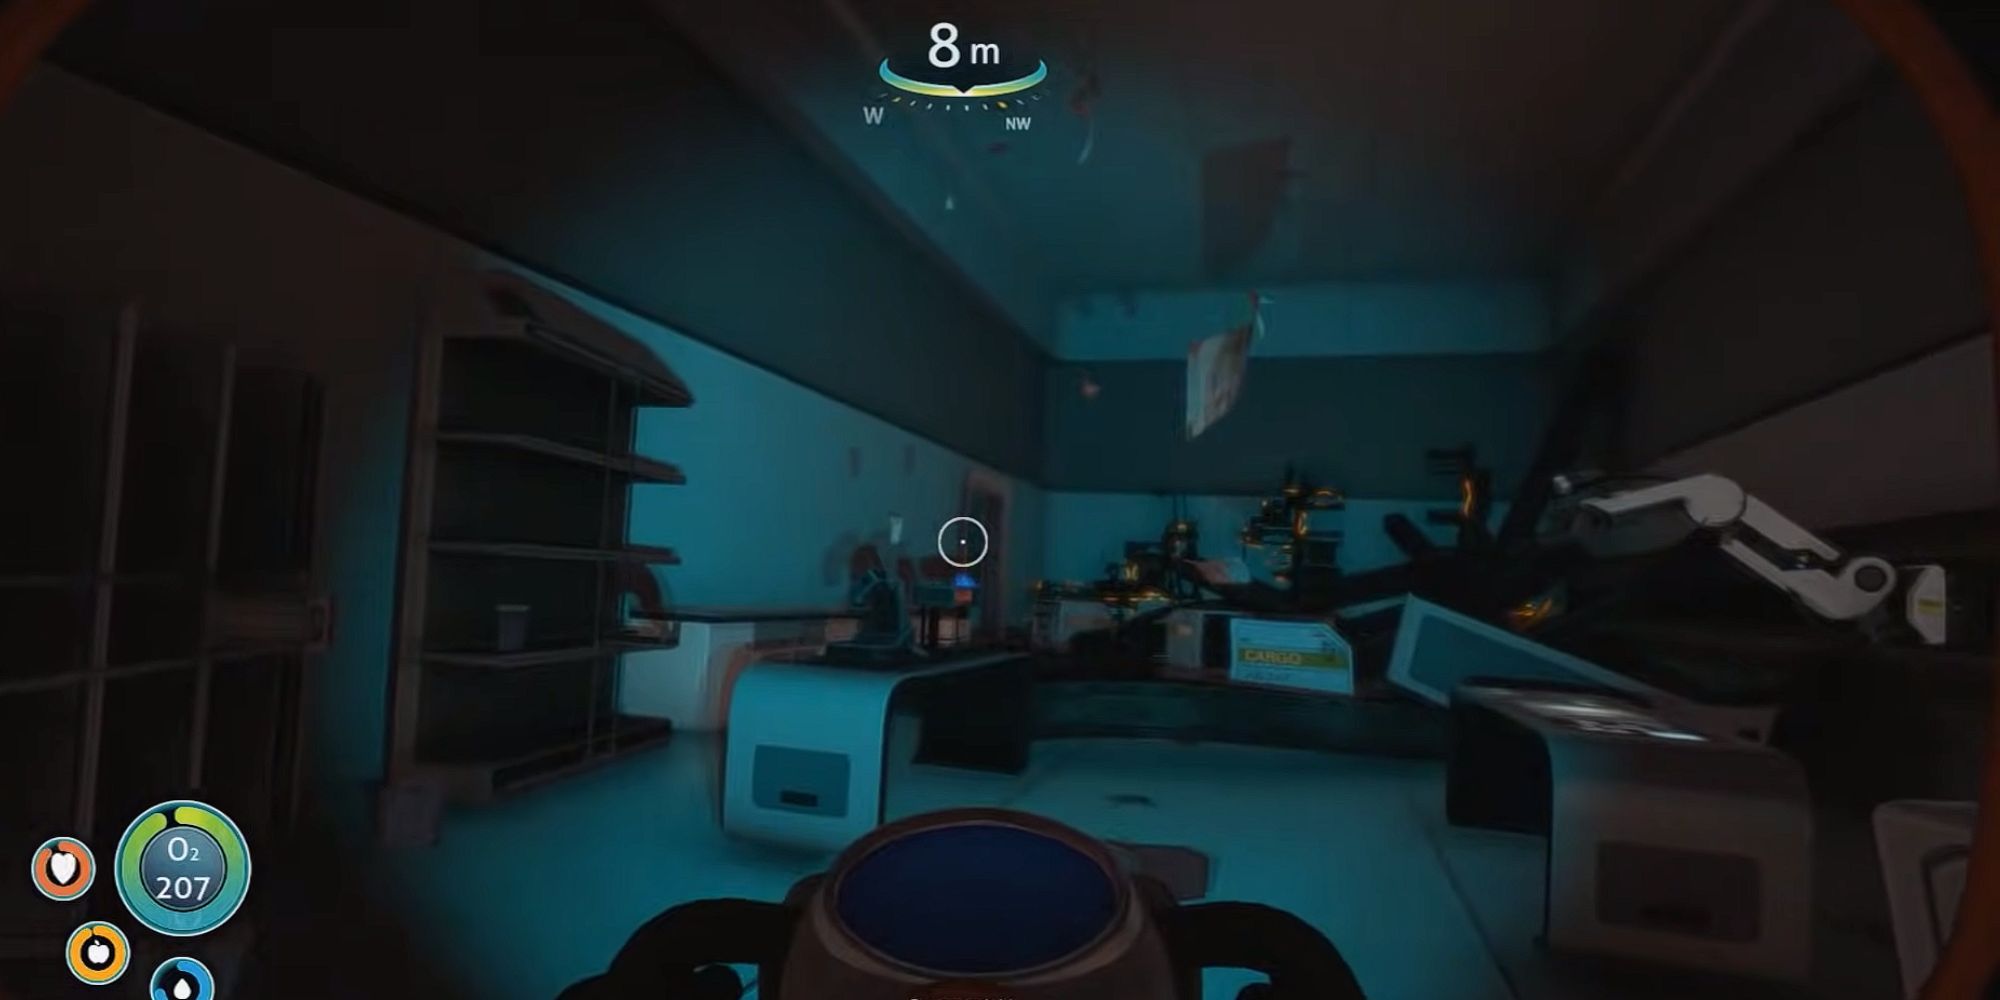 player explores a submerged section of the Aurora with shelves, desks, and floating debris